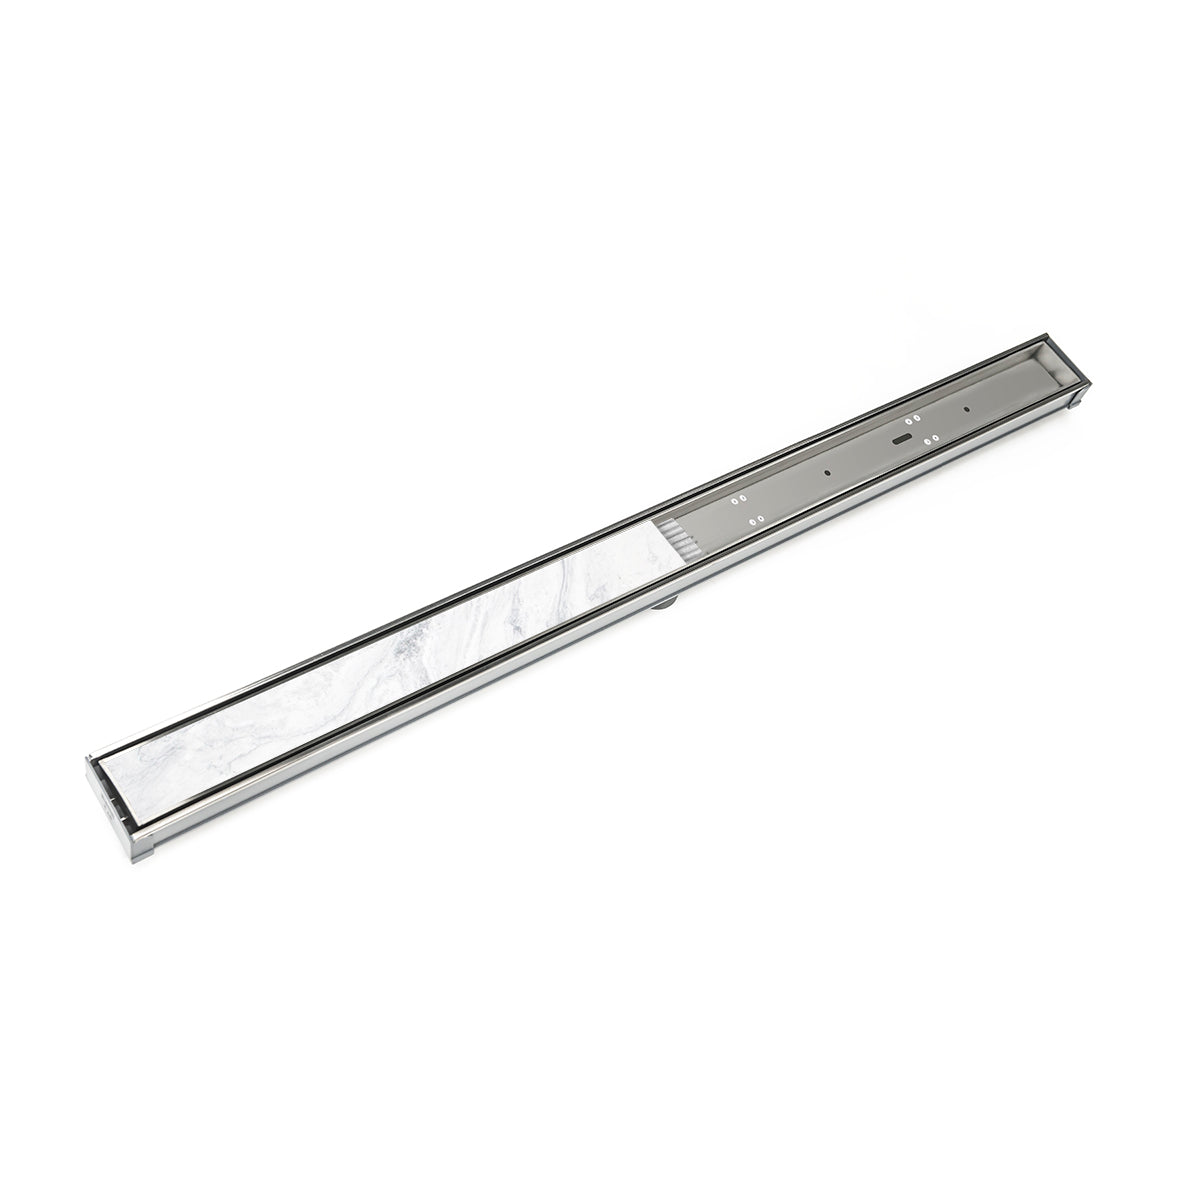 Infinity Drain 36" S-PVC Series Low Profile Site Sizable Linear Drain Kit with 2 1/2" Tile Insert Frame